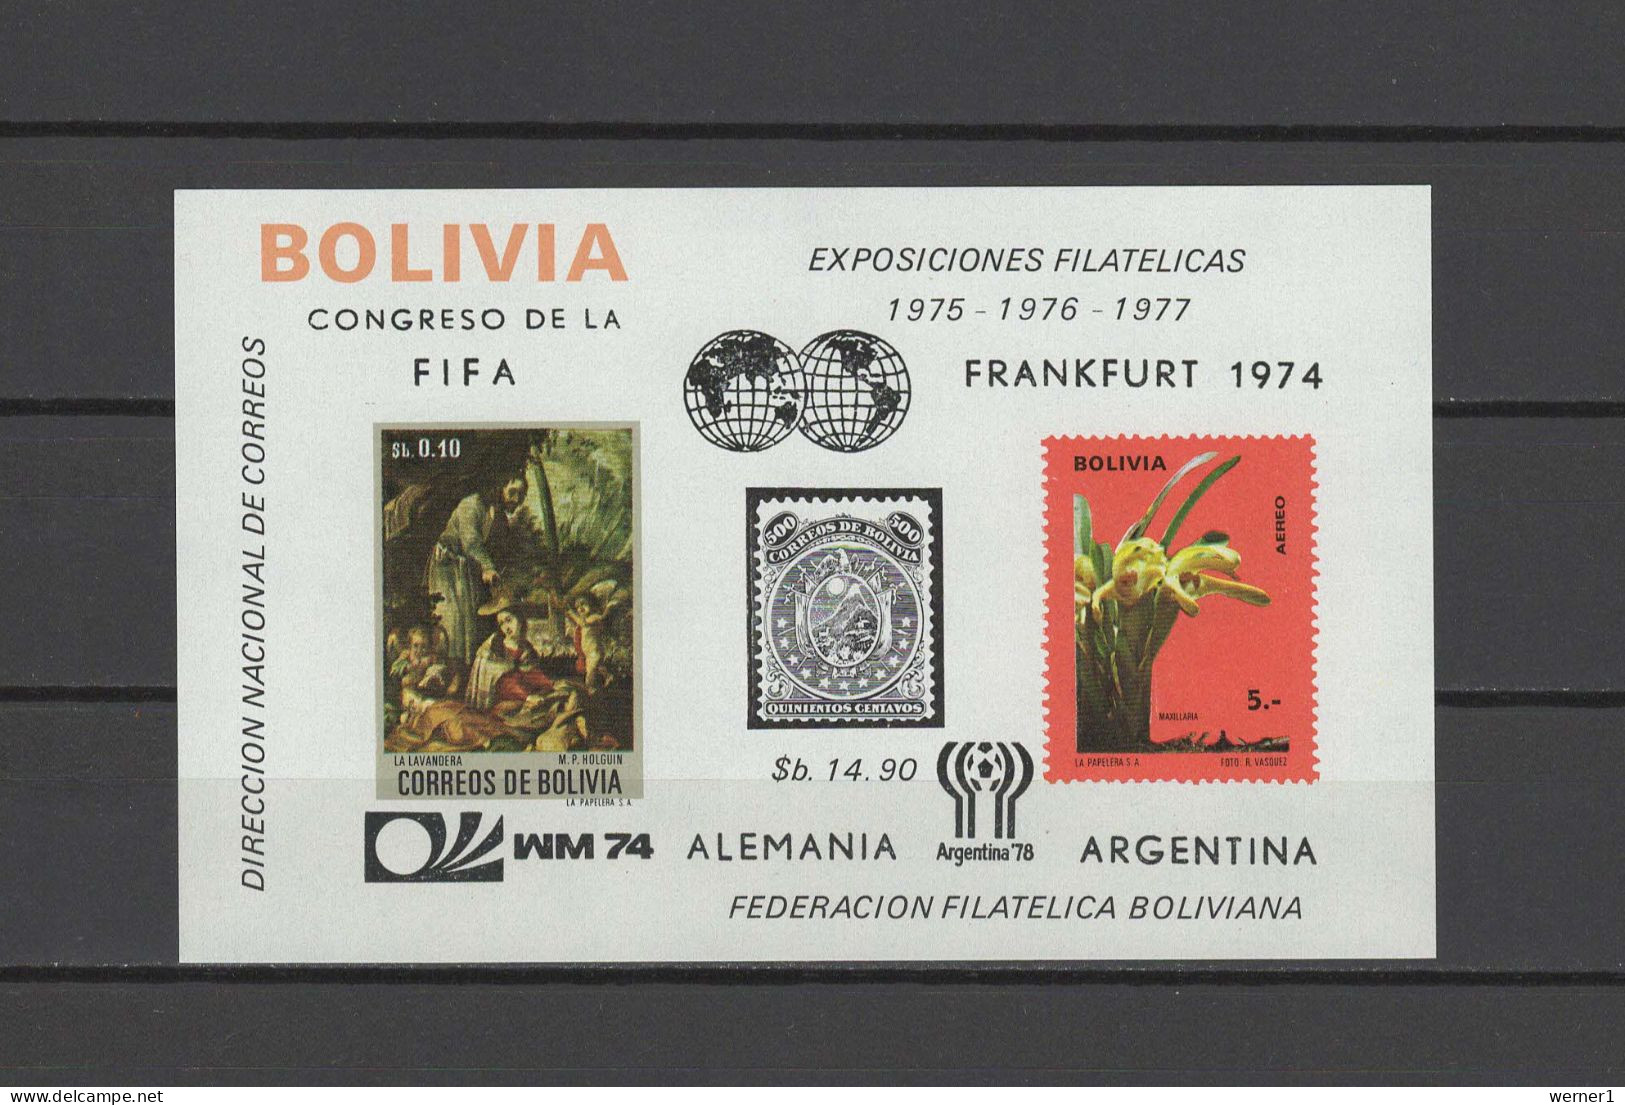 Bolivia 1974 Football Soccer World Cup, Paintings, Orchids S/s MNH -scarce- - 1974 – Westdeutschland